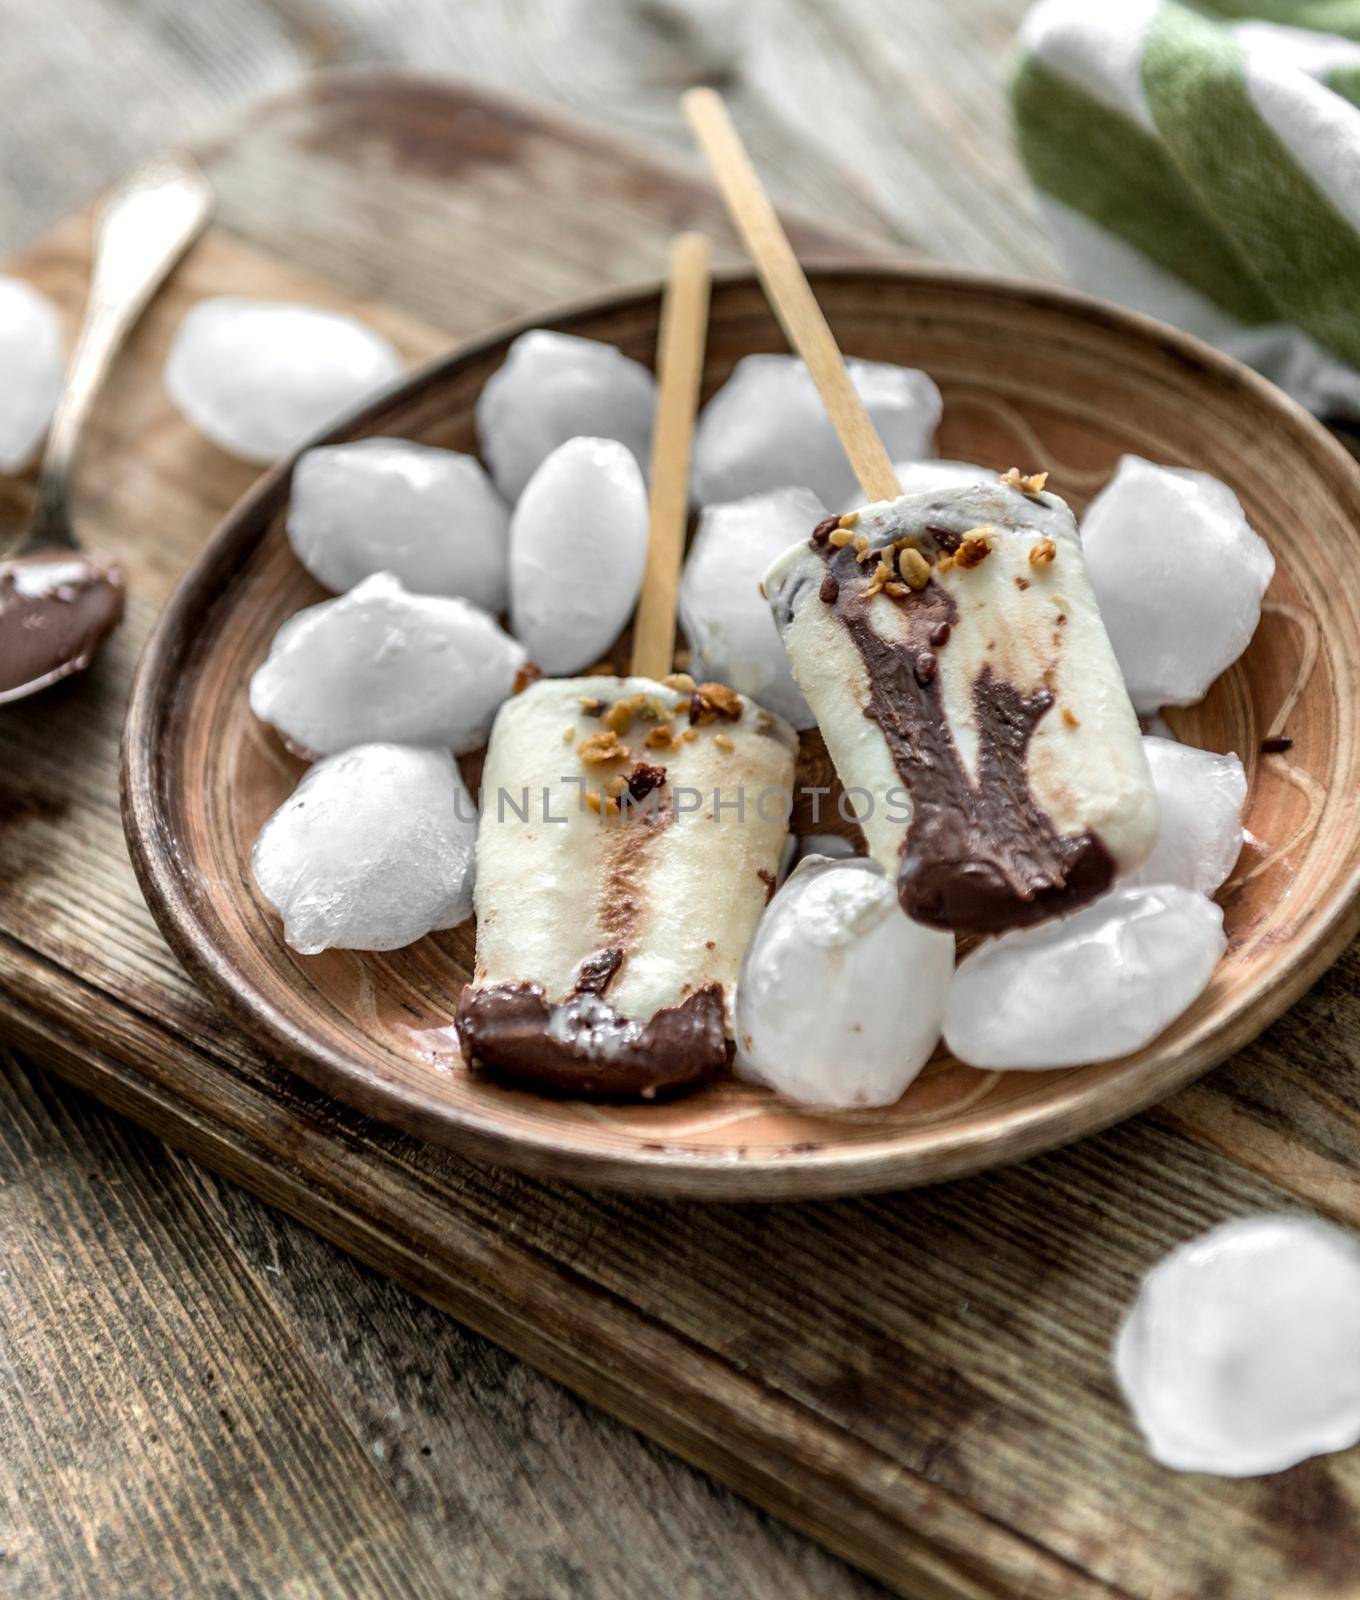 Homemade cream ice cream with chocolate and muesli on a wooden background